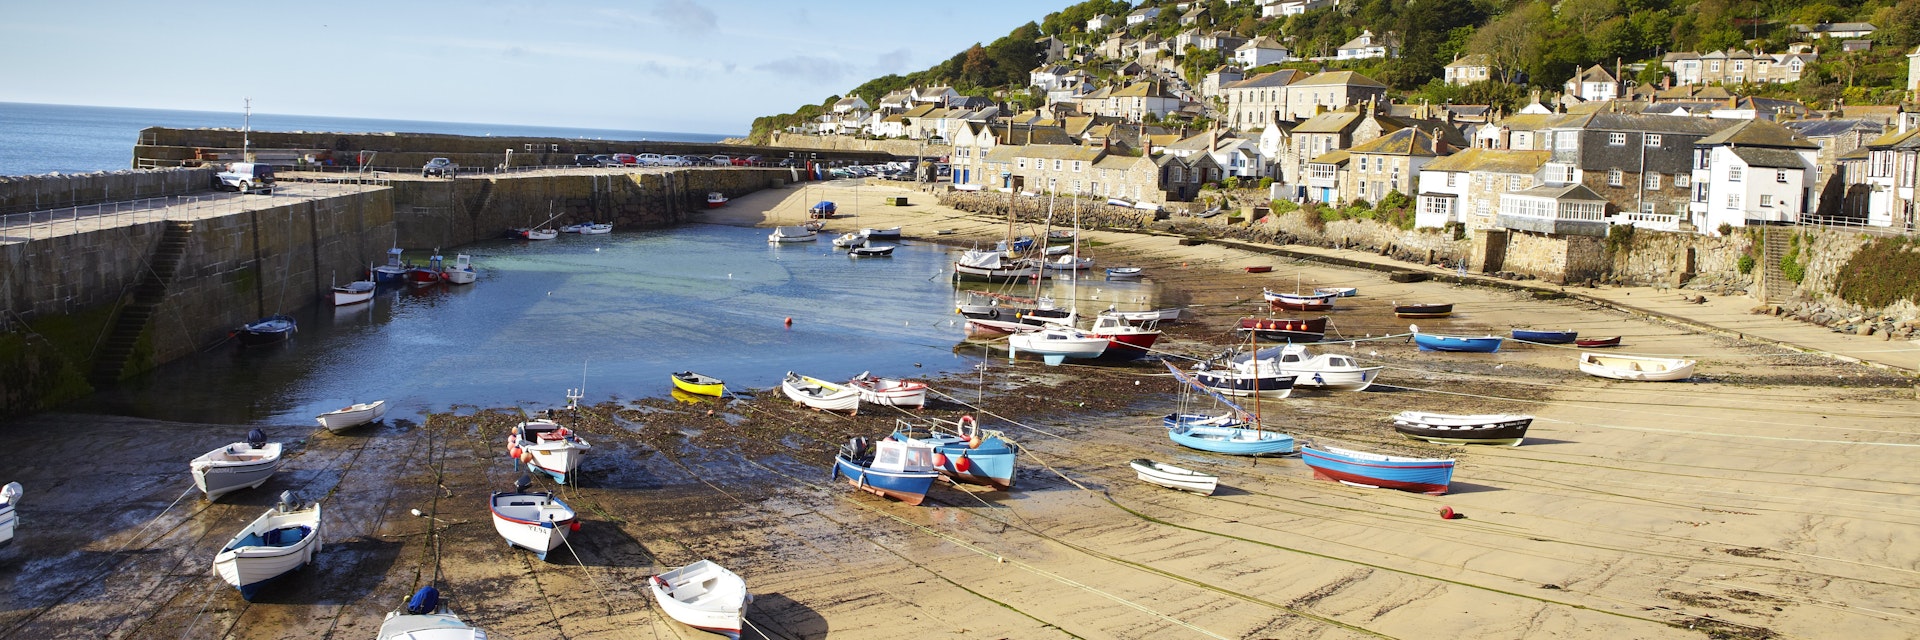 Low tide in Mousehole’s harbour.